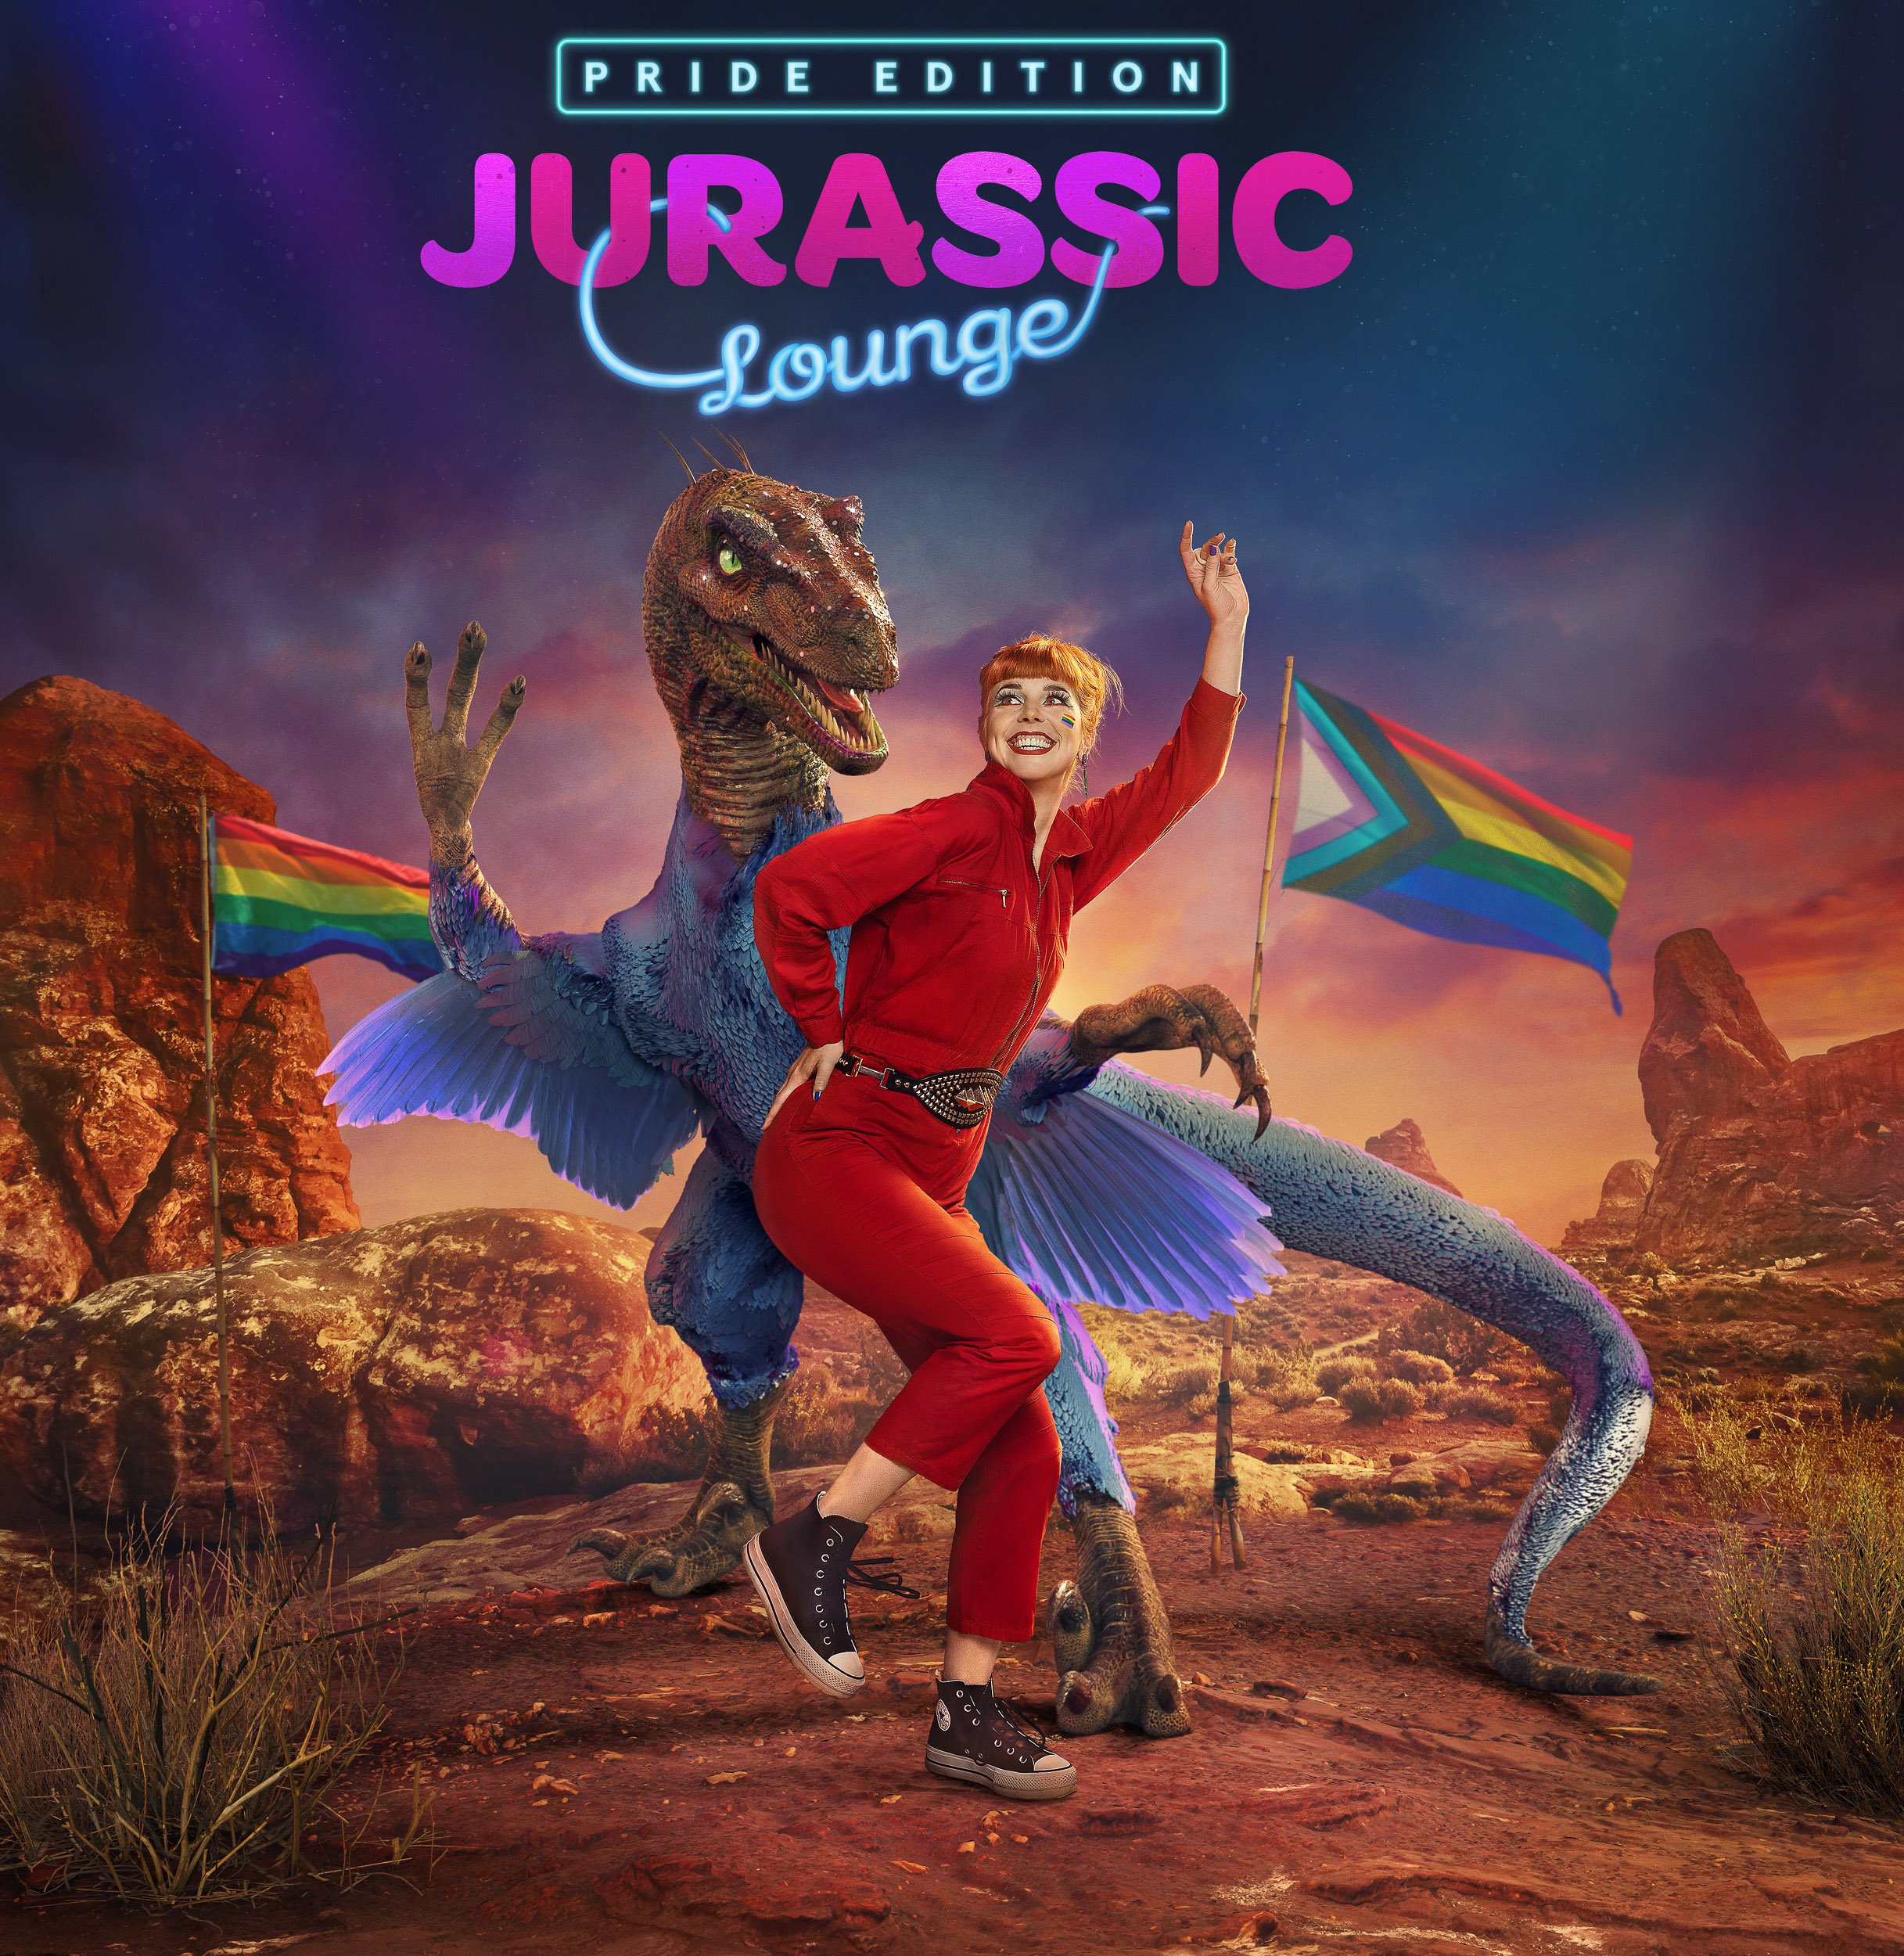 Jurassic Lounge - Pride Edition. Design and art direction by Carnival Studio